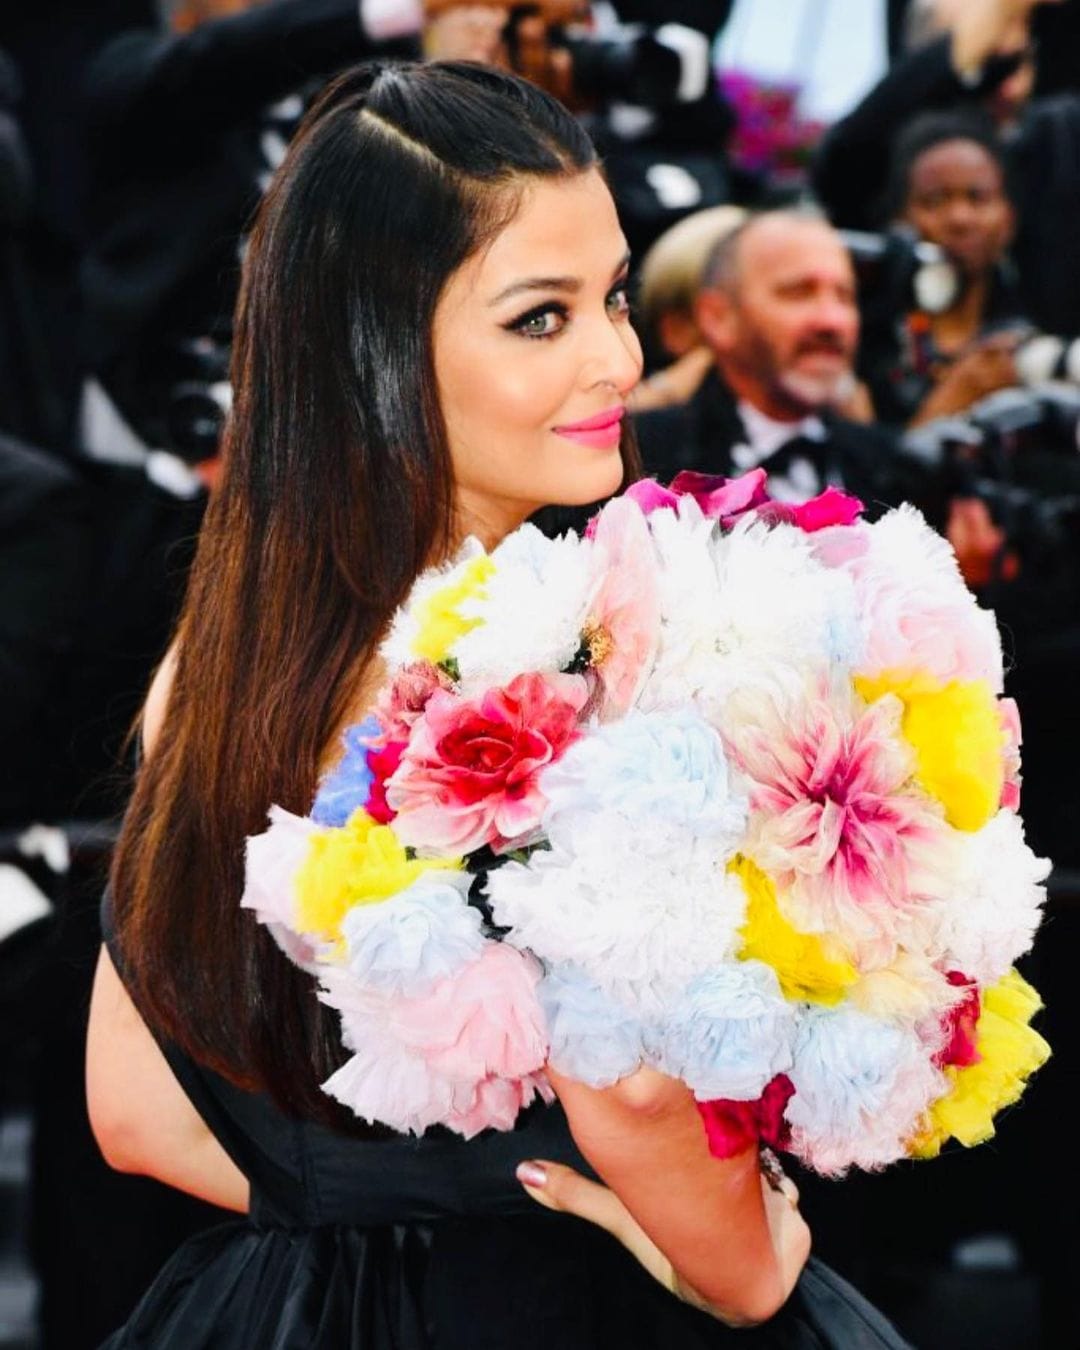 The bouquet of flowers neatly placed on the dress made it a colourful soiree on the red carpet.